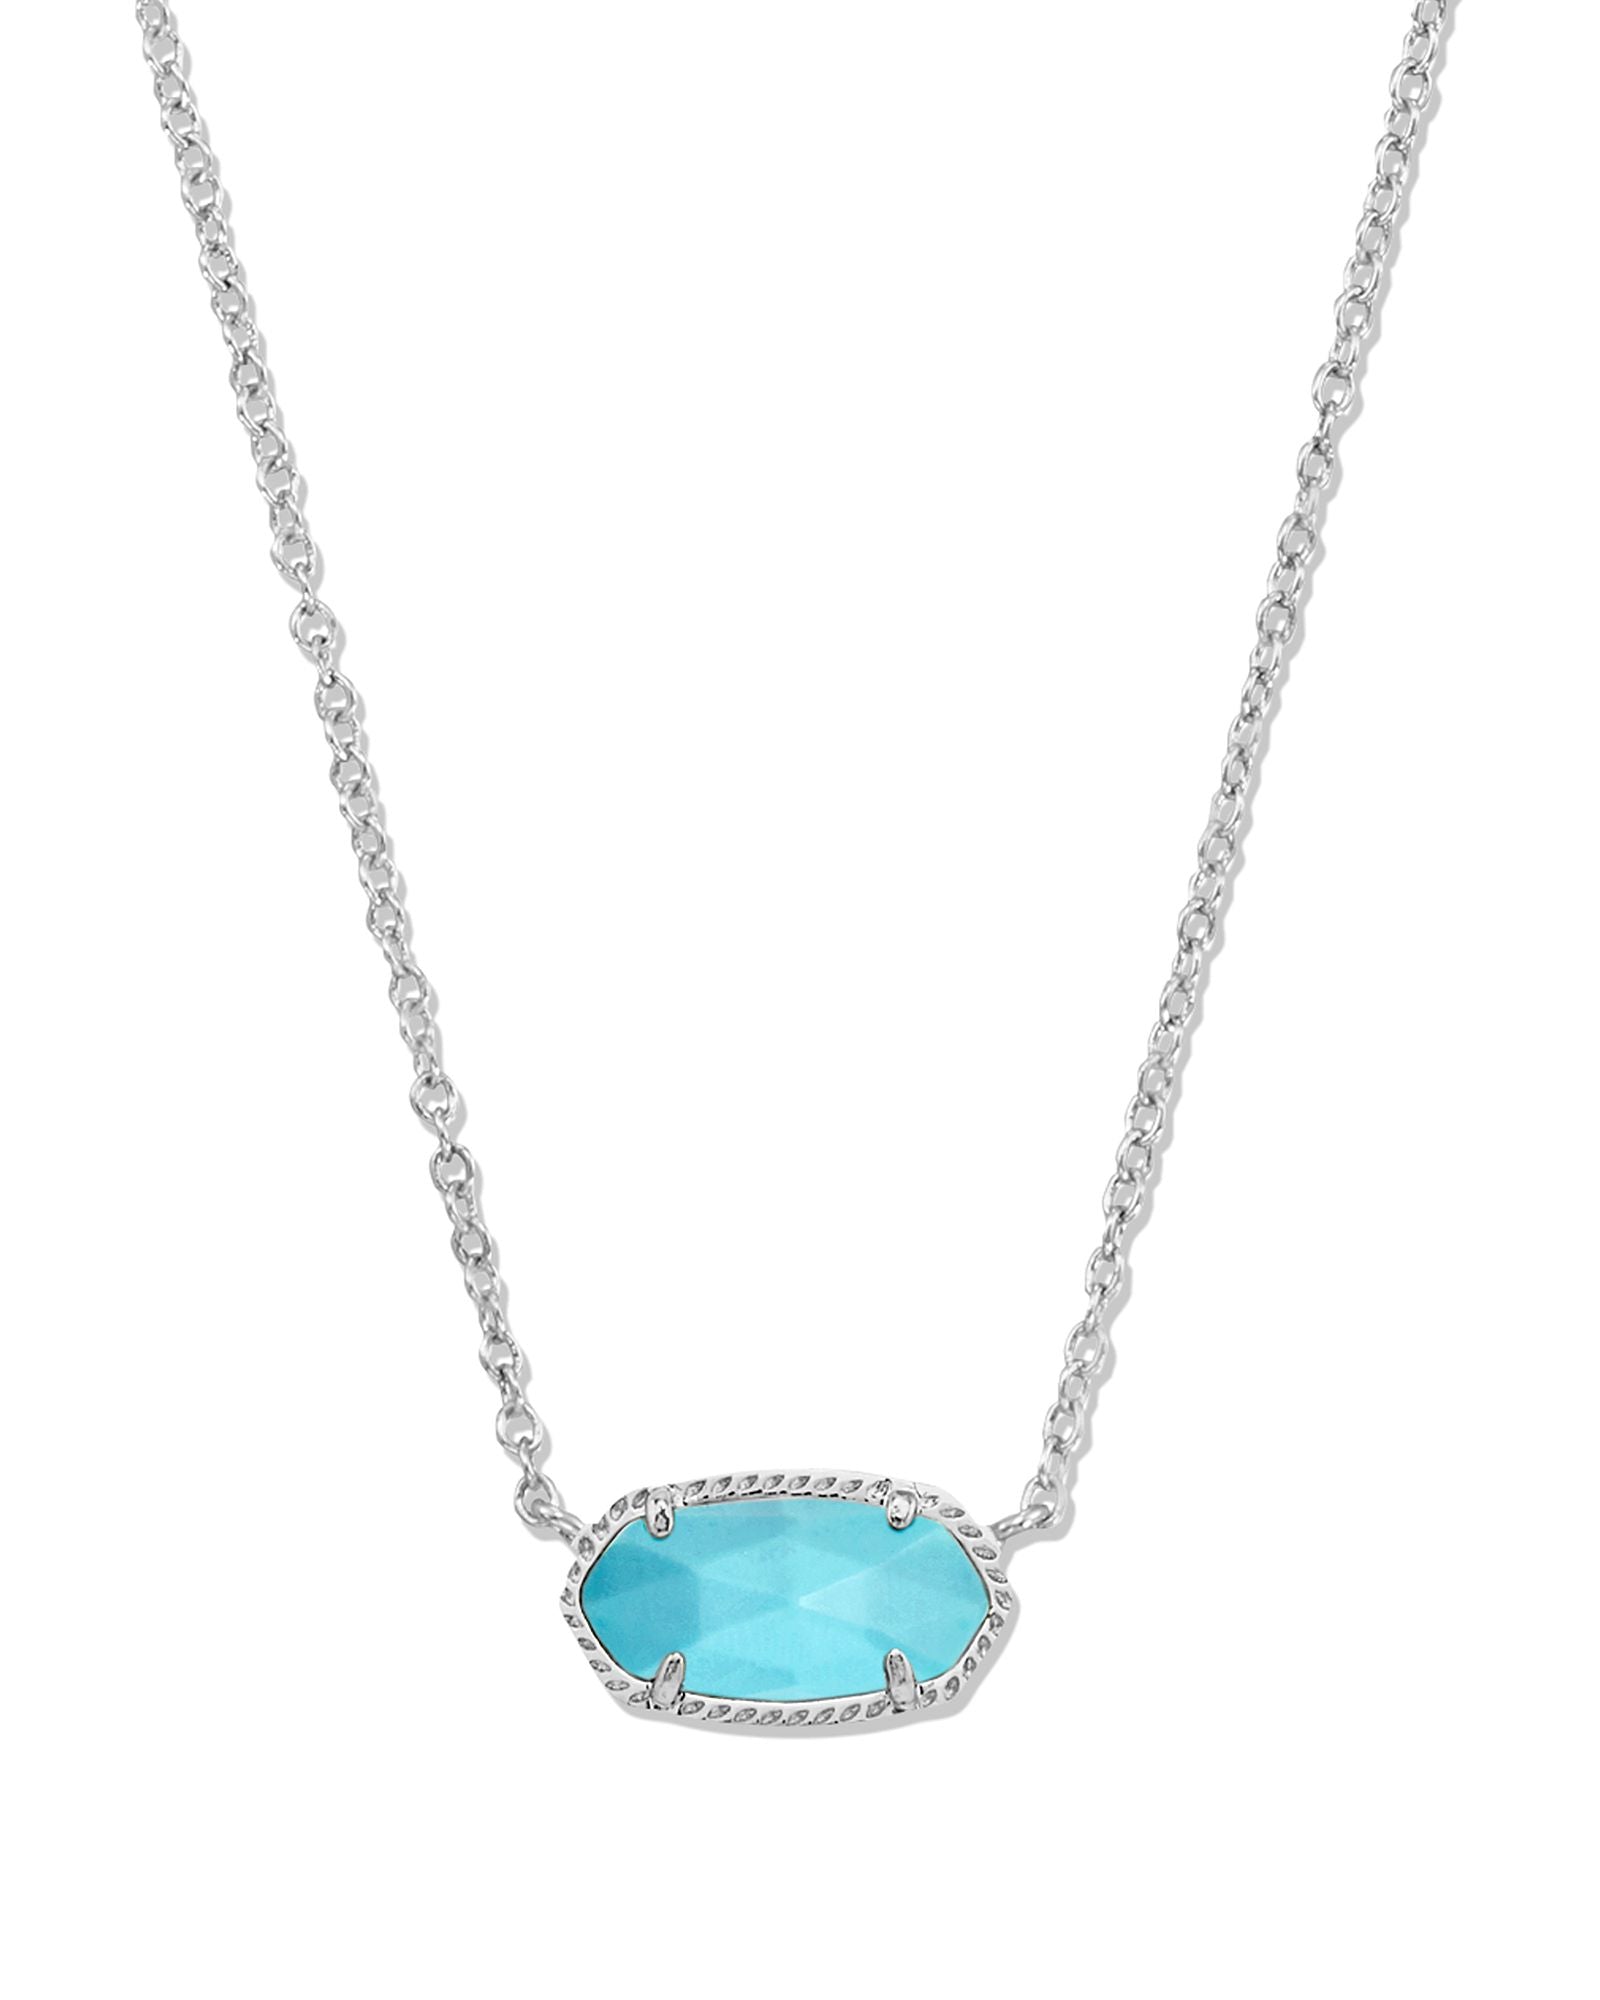 Elisa Necklace in Silver Turquoise Magnesite